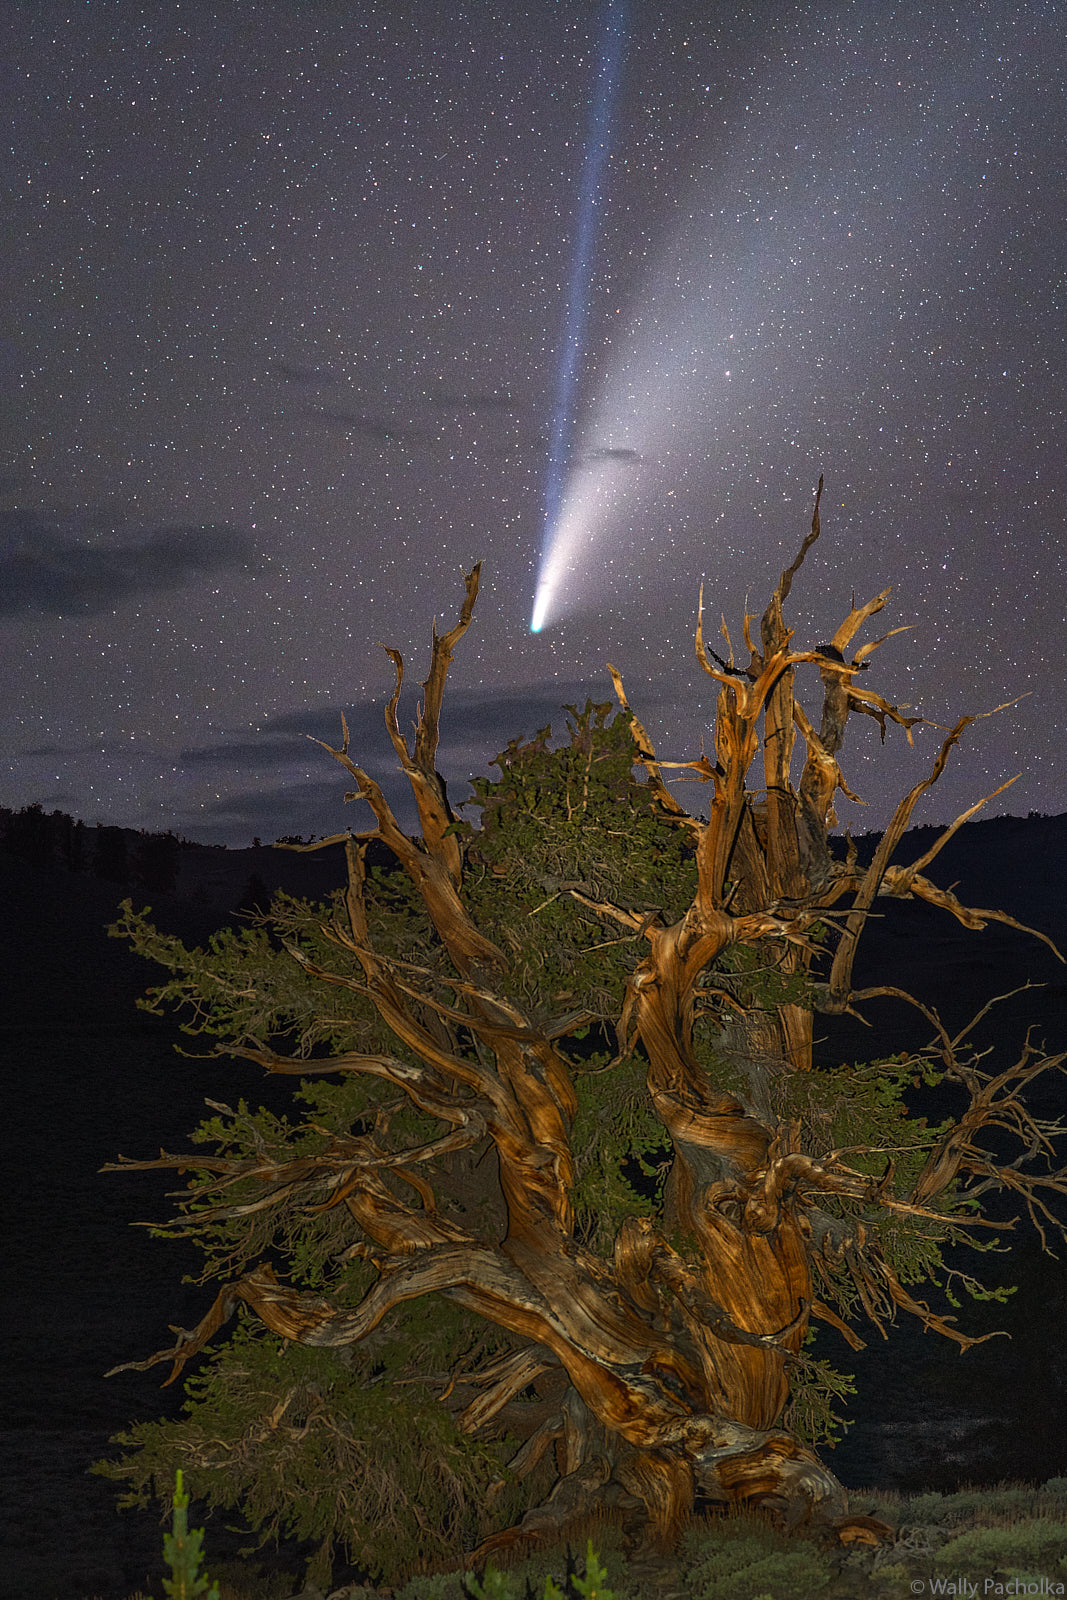 Comet Neowise shines brightly above an ancient 4000 year old bristlecone tree.